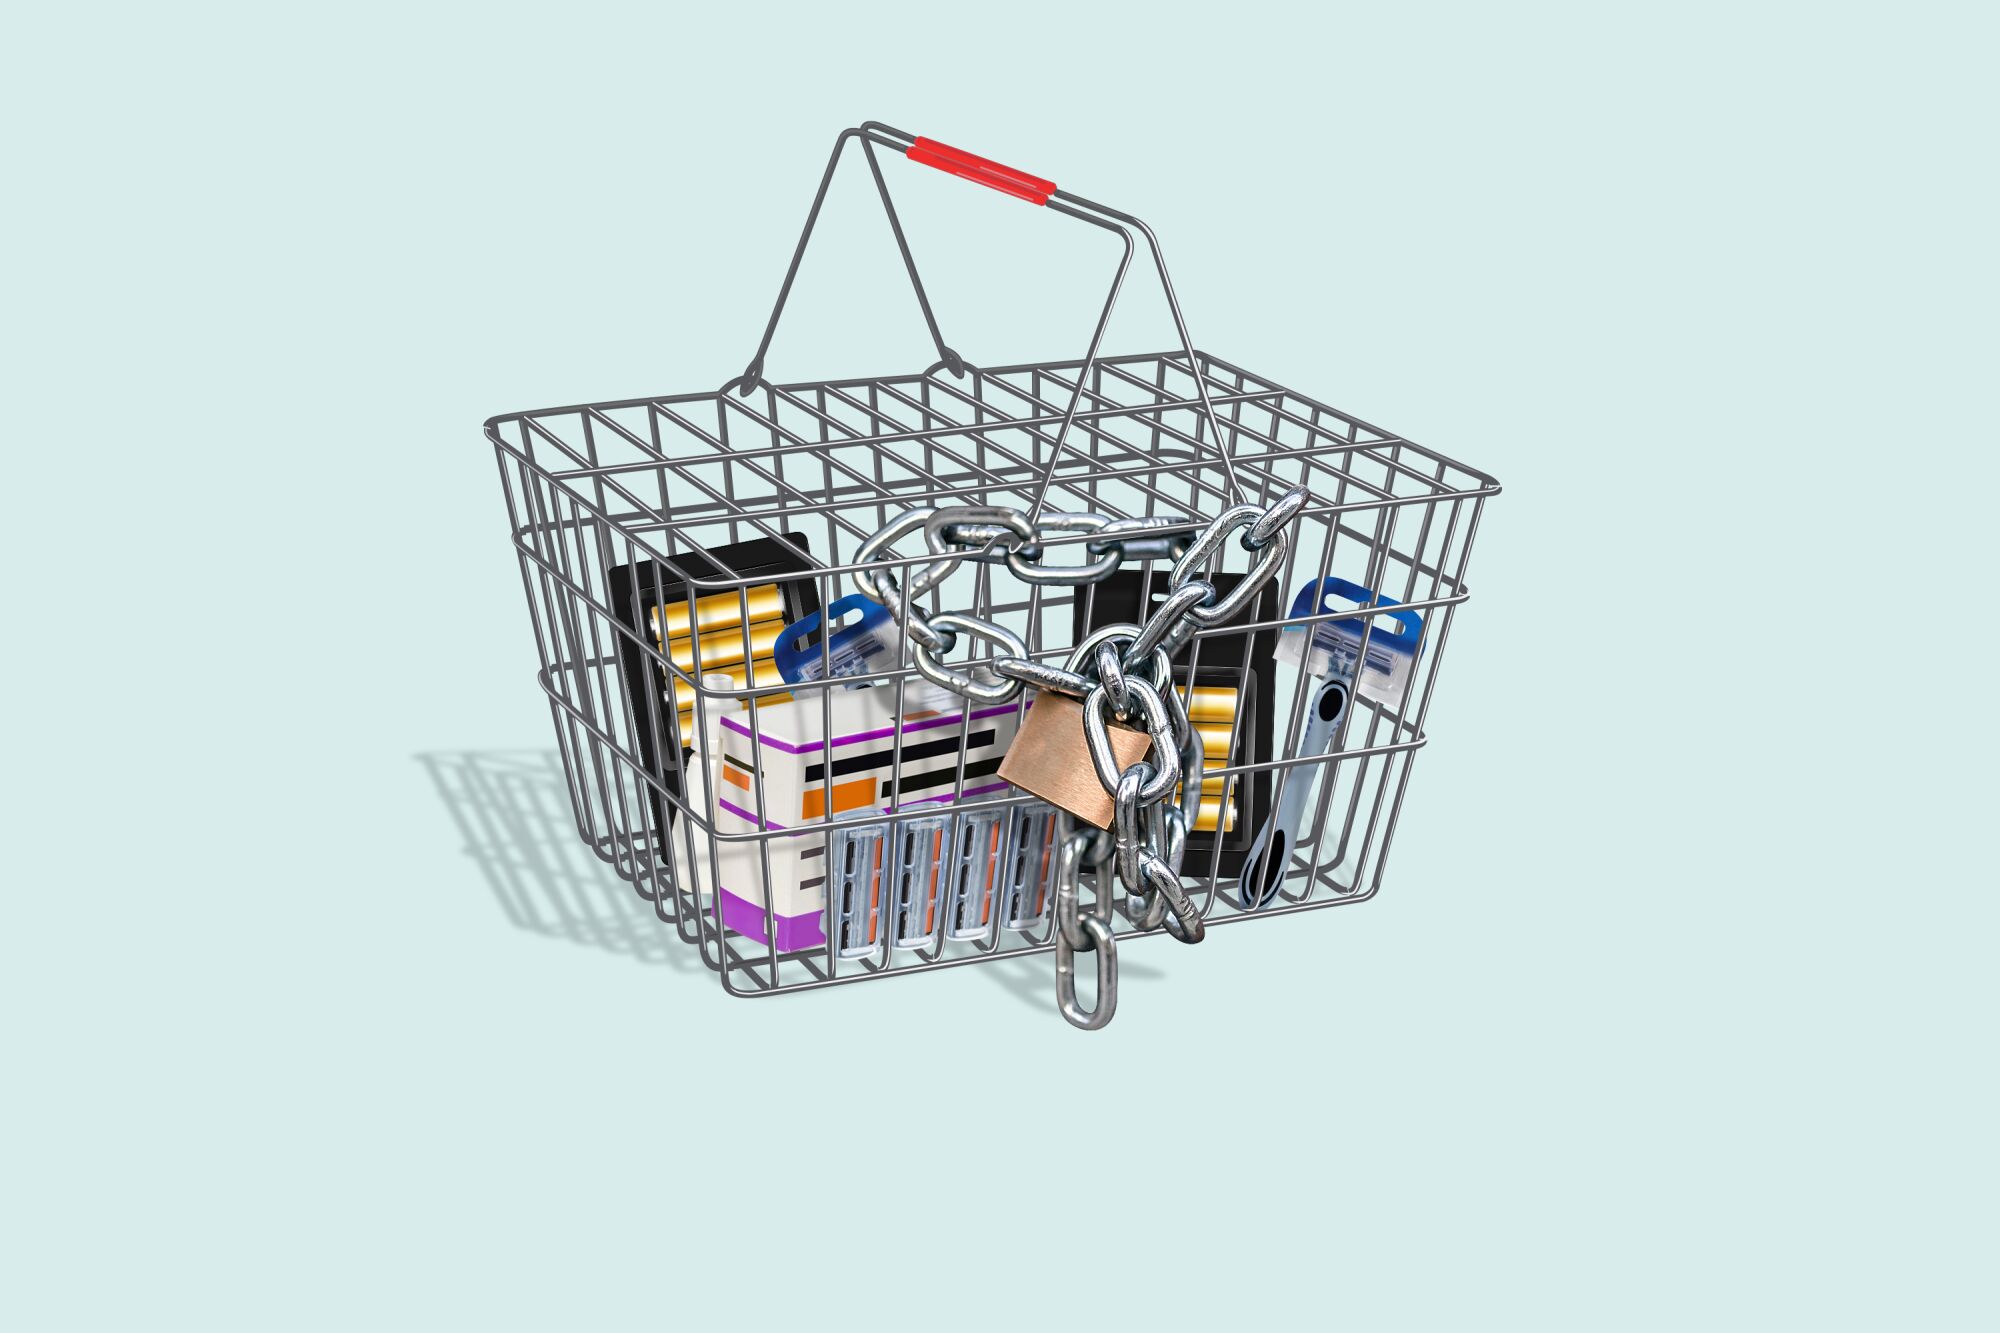 Photo illustration of a shopping basket bound with a chain and lock.